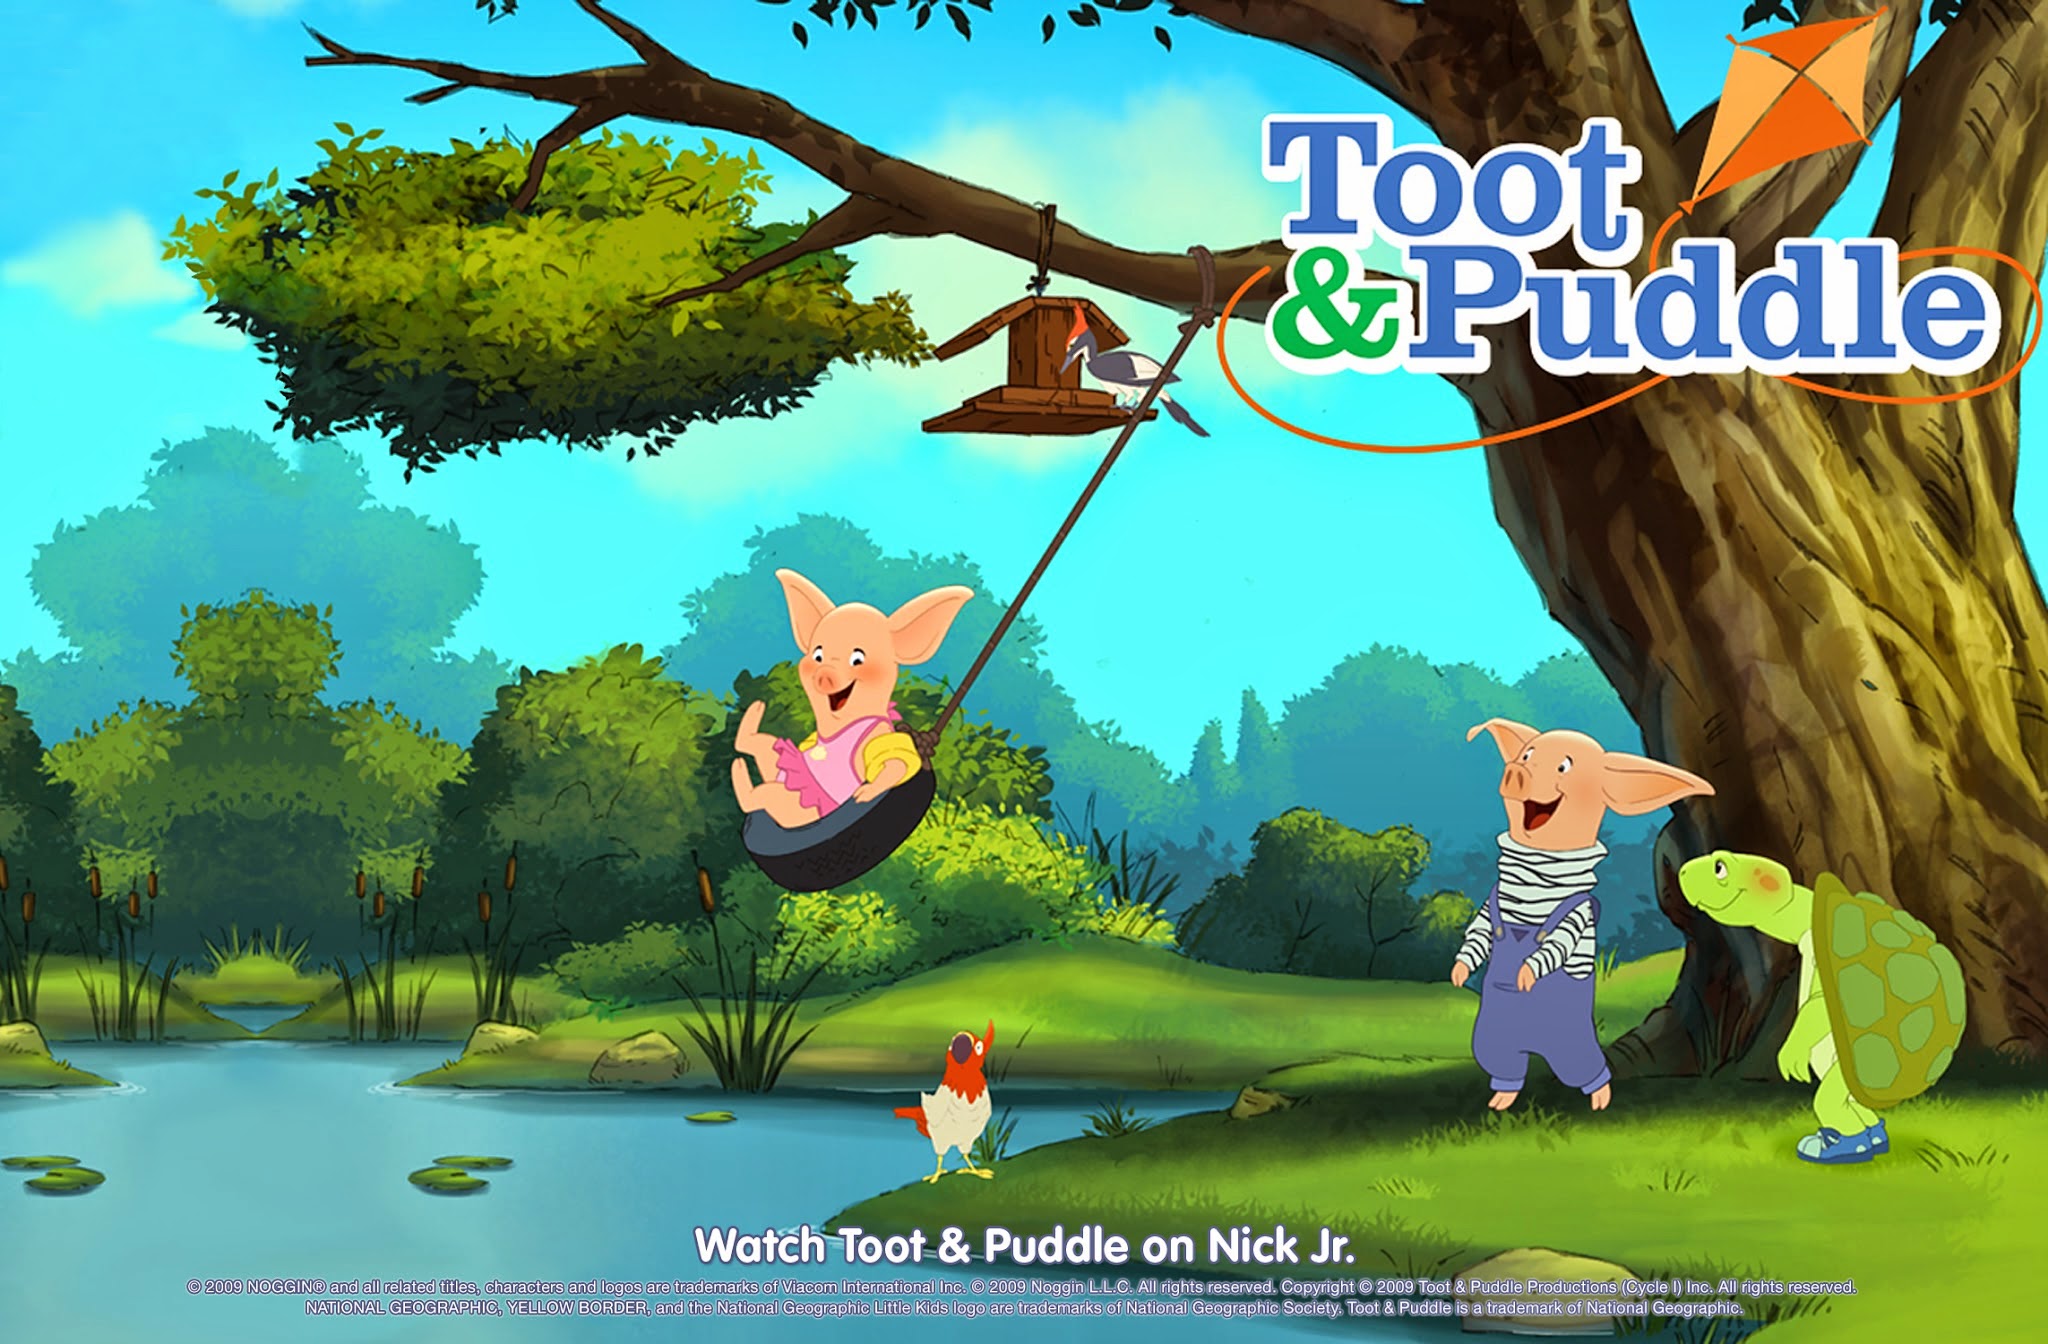 toot-puddle-wallpaper-wide